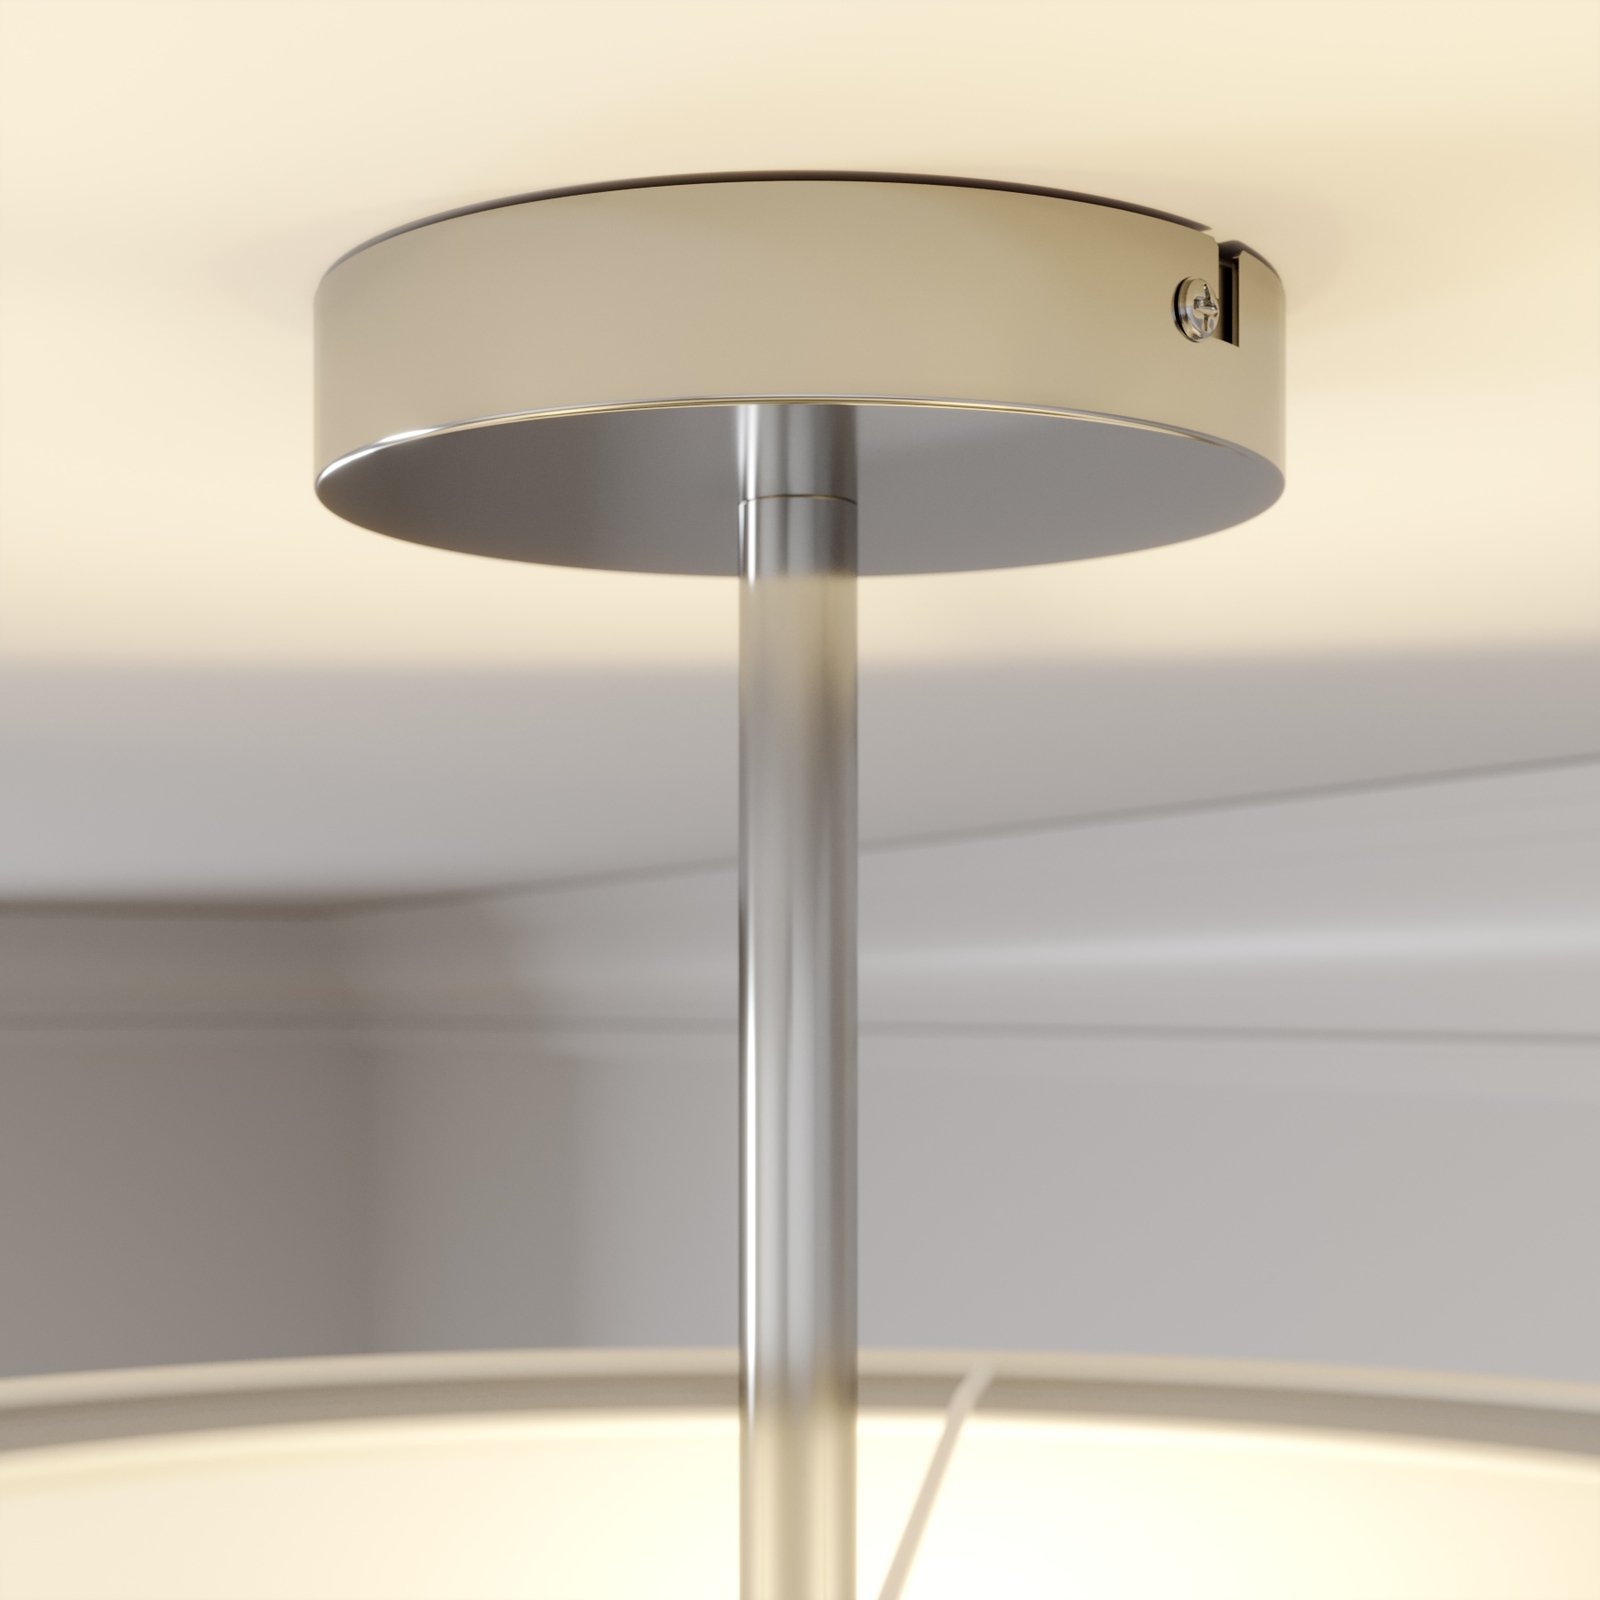 Pikka ceiling light with a white lampshade